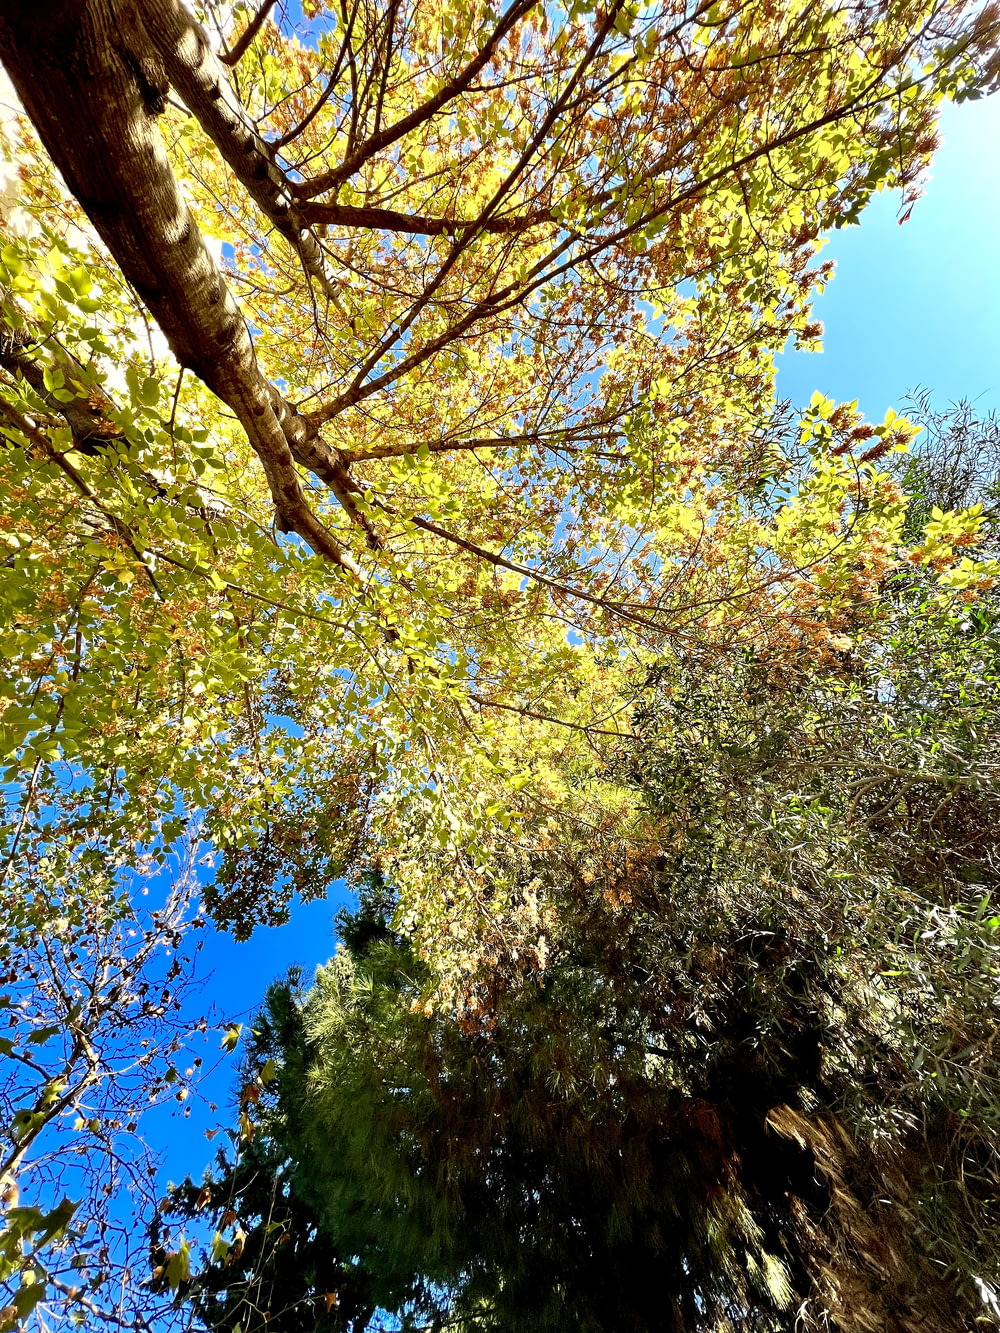 looking up at a tree with yellow leaves and blue sky